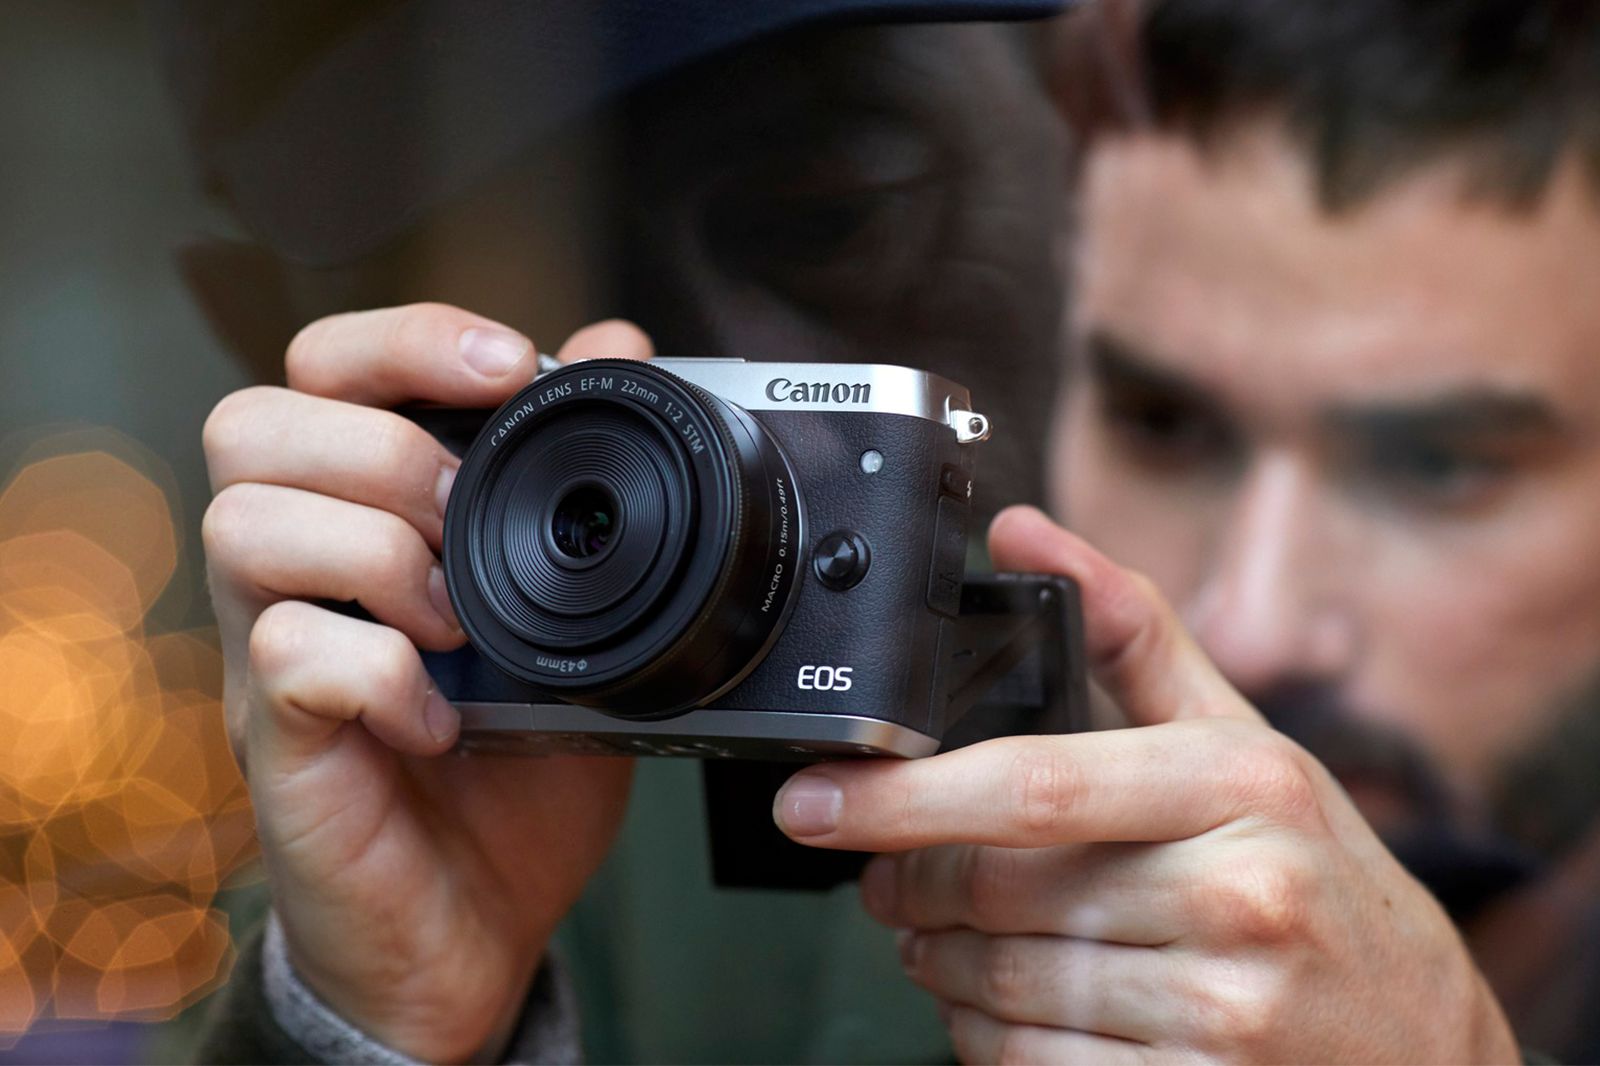 canon eos m6 is canon’s new top viewfinder free mirrorless camera image 1